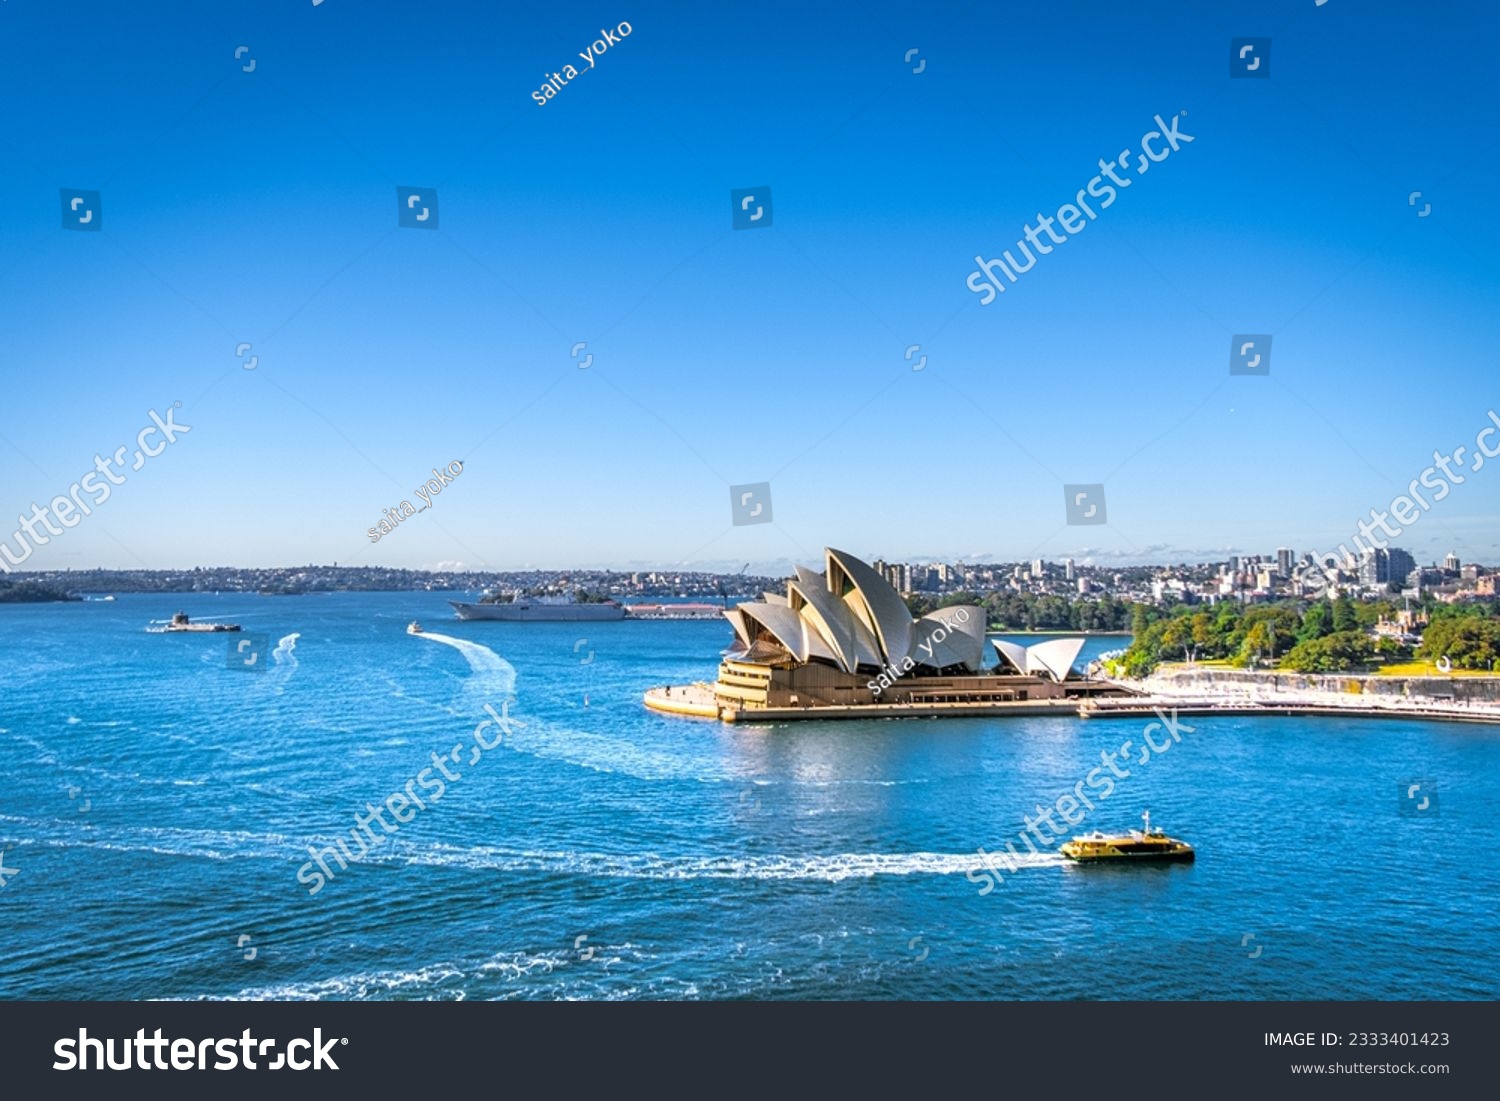 A busy morning around the Sydney Opera House,the transportation boat are cruising in front of the famous Sydney landmark #2333401423